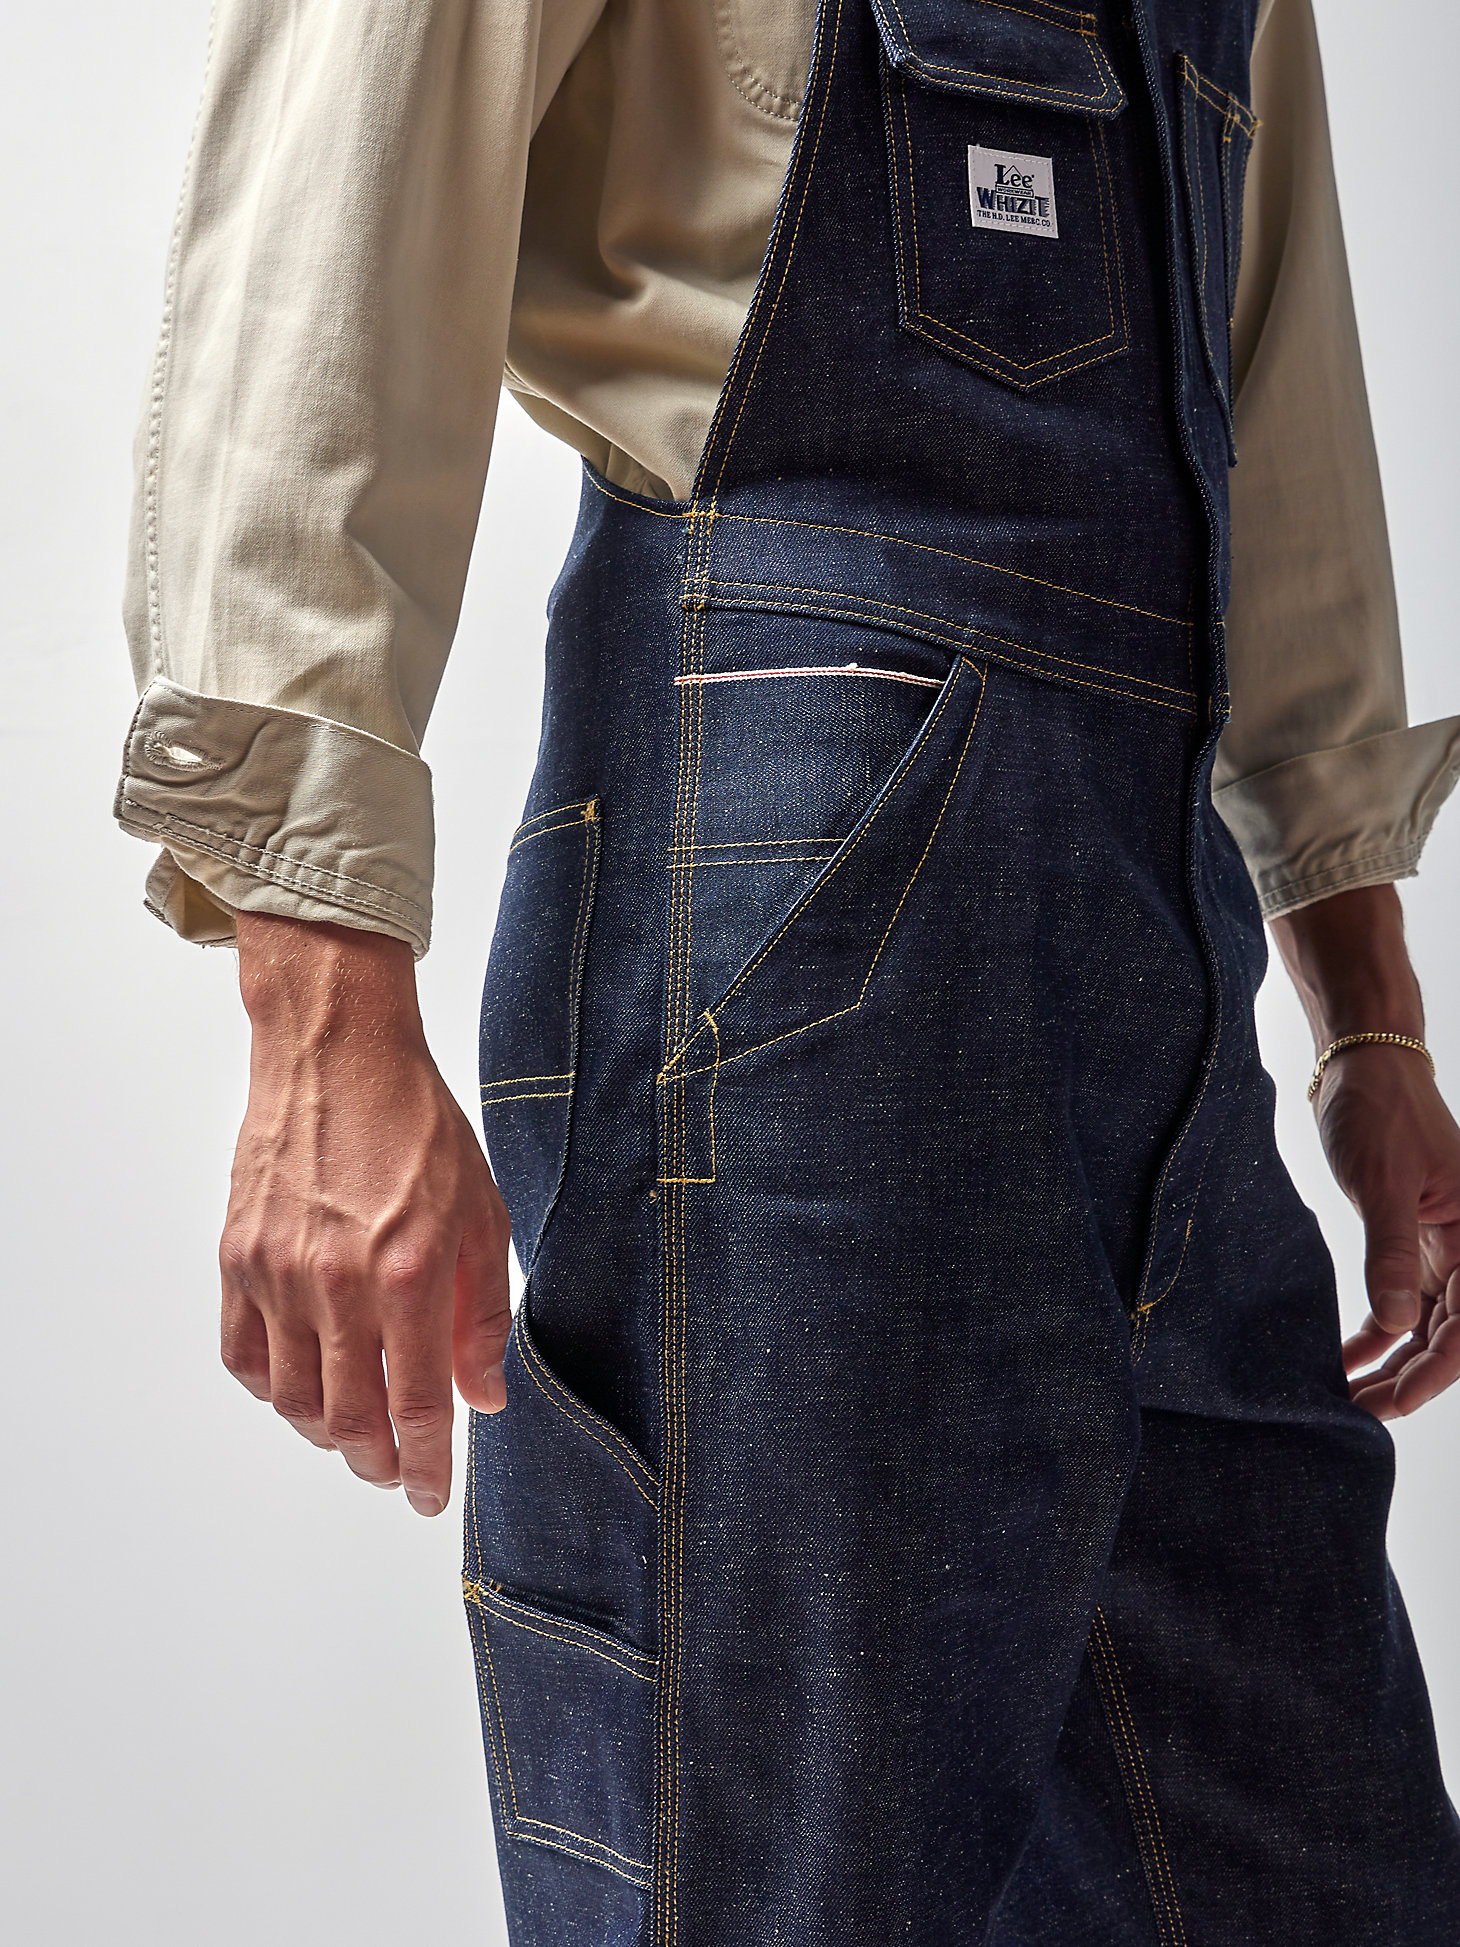 Men's Lee® x The Brooklyn Circus® Whizit Zip Overall in Indigo Selvedge alternative view 4